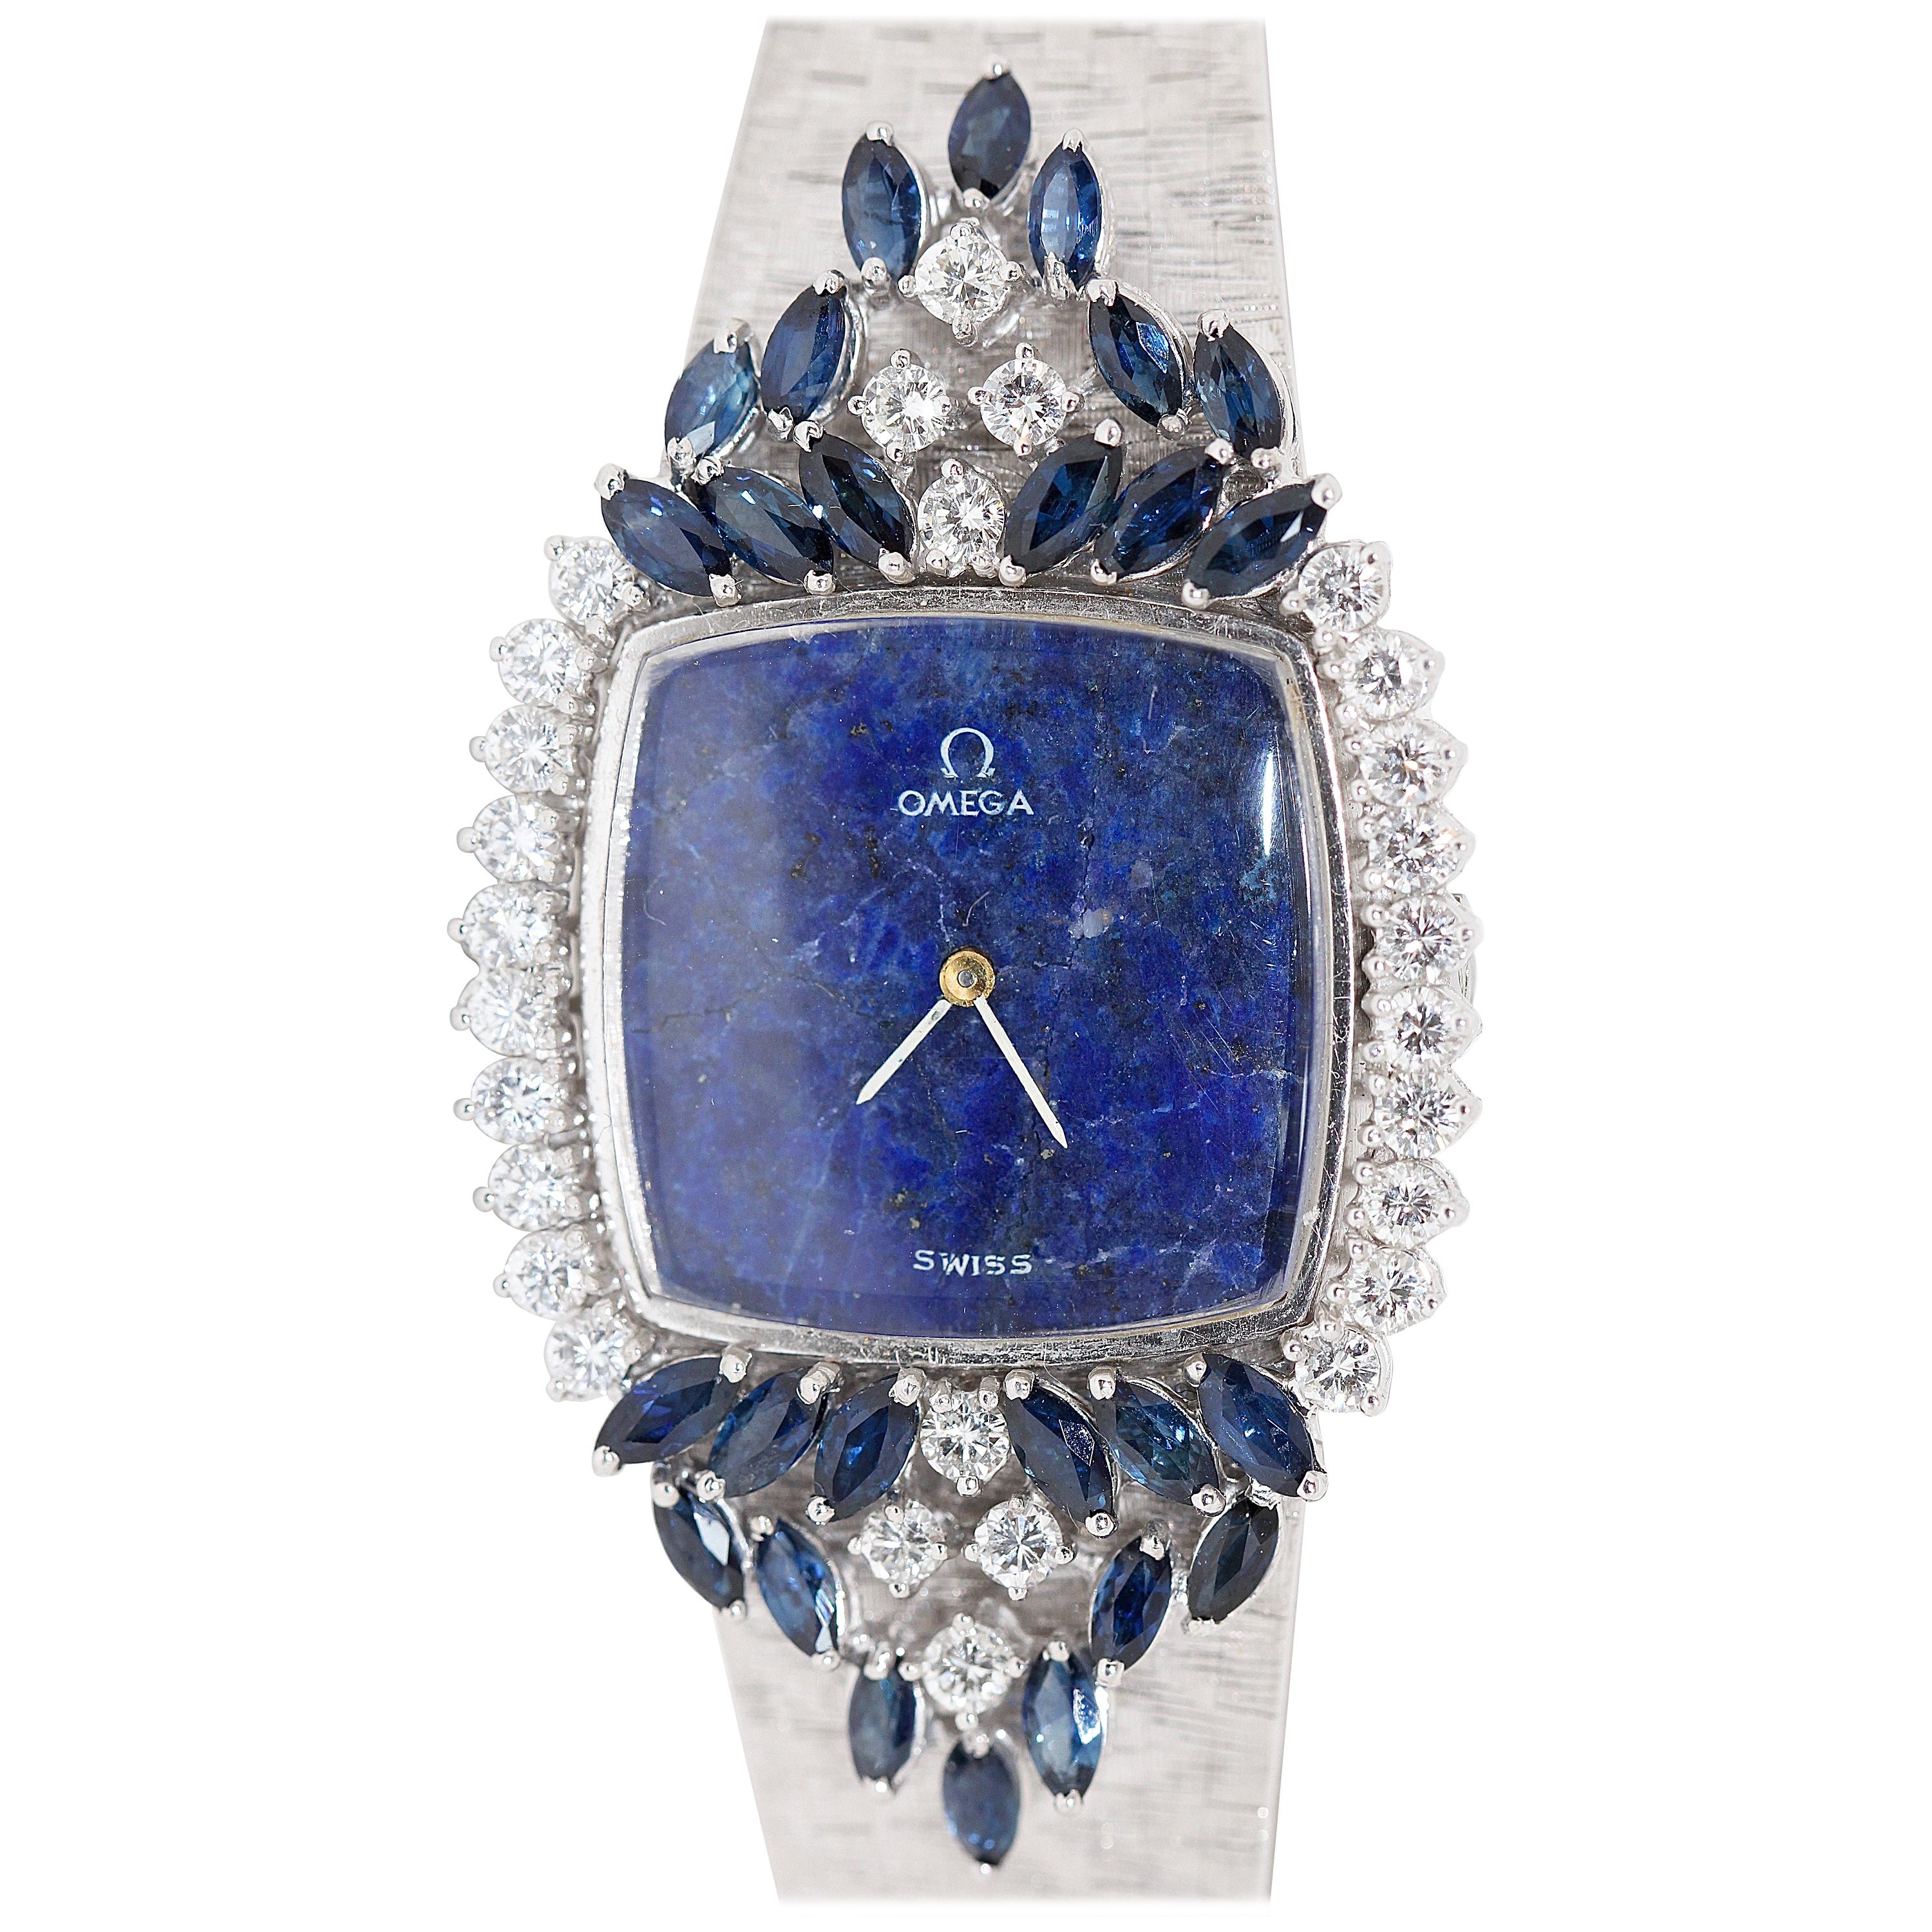 Magnificent Ladies Wristwatch, Omega 18 Karat Gold with Diamonds and Sapphires